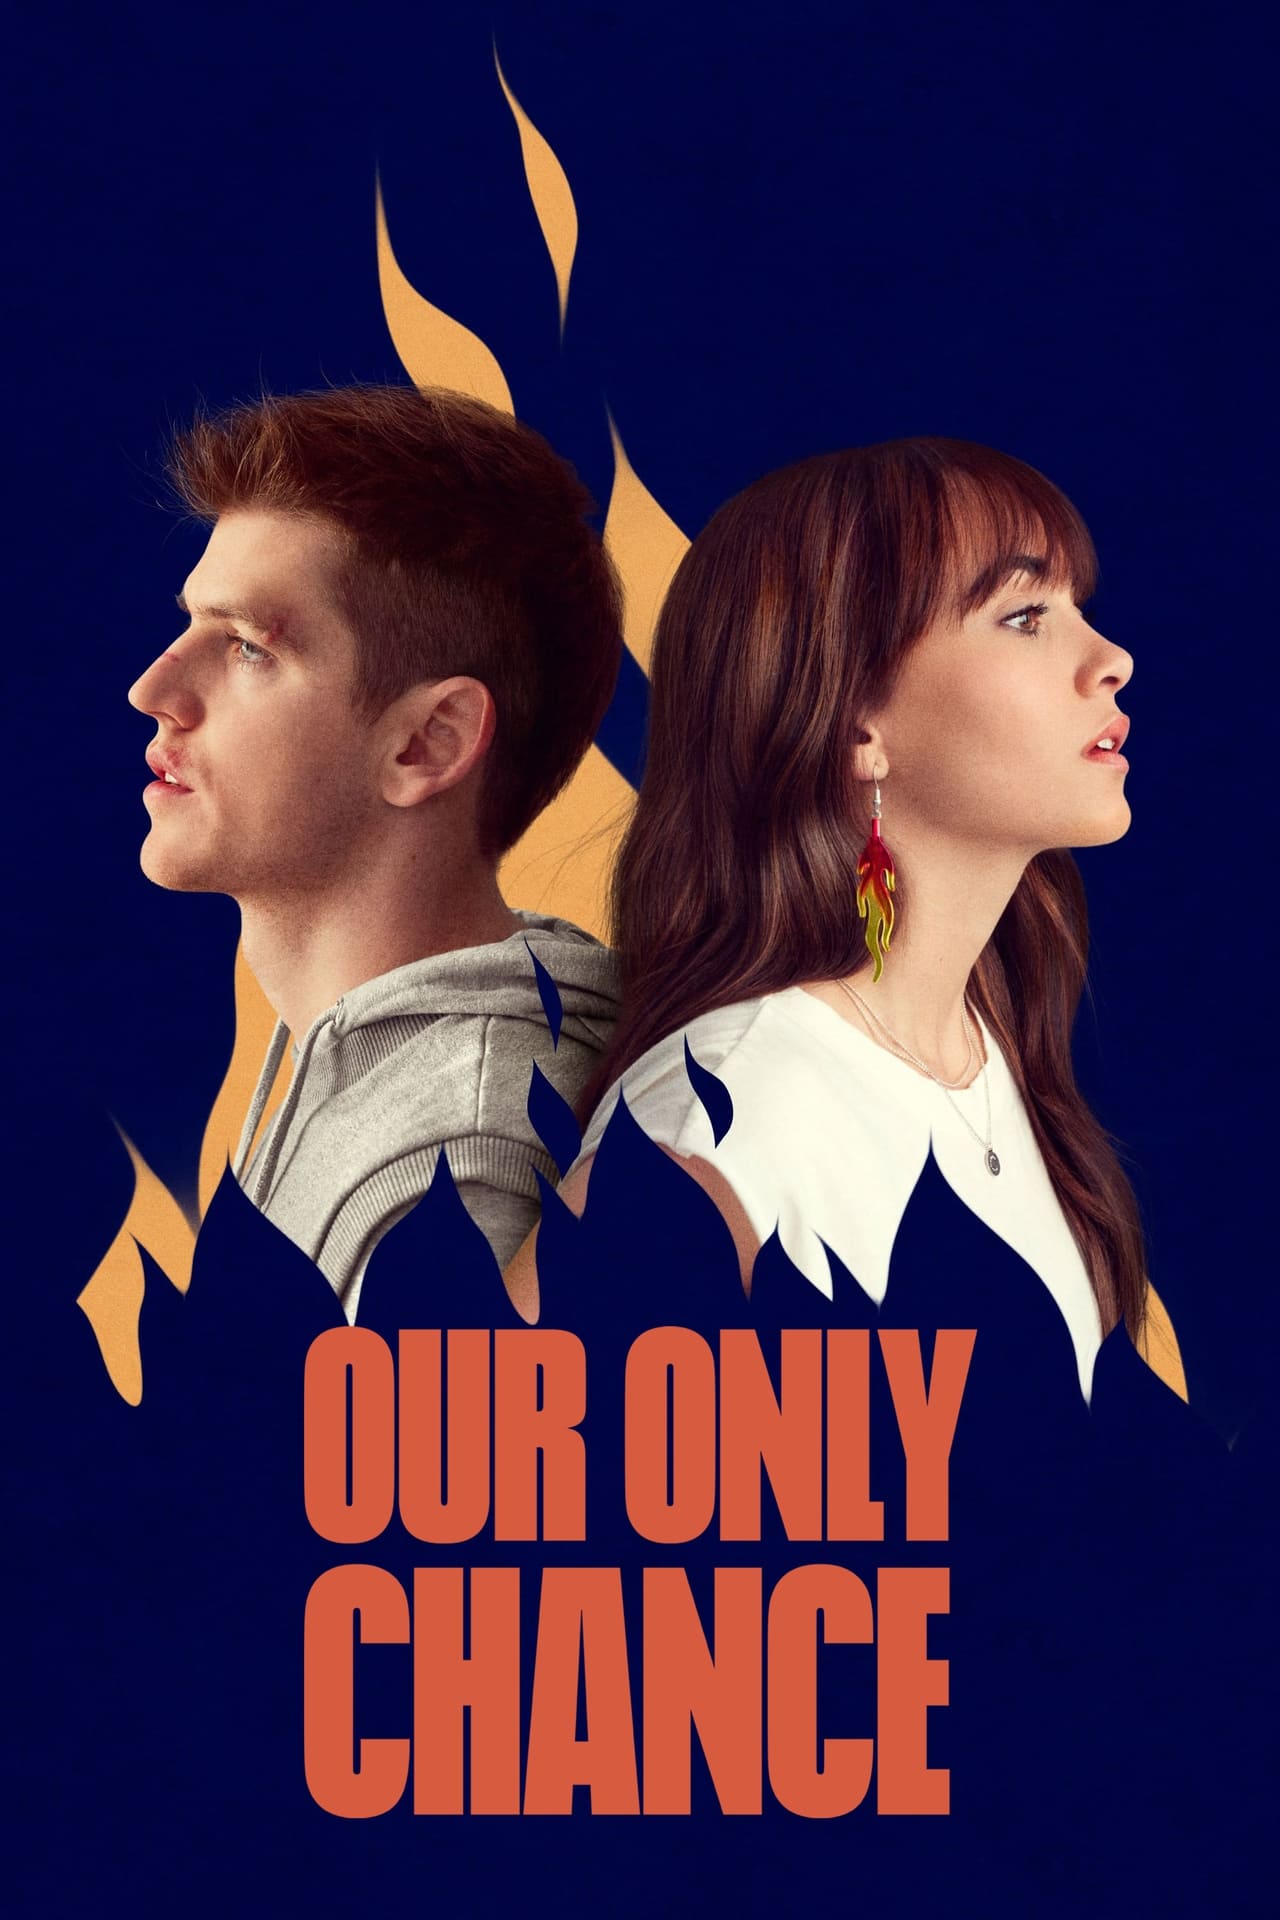 Our Only Chance (2022) S1 EP01&EP05 256Kbps 25Fps 48Khz 5.1Ch Disney+ DD+ E-AC3 Turkish Audio TAC